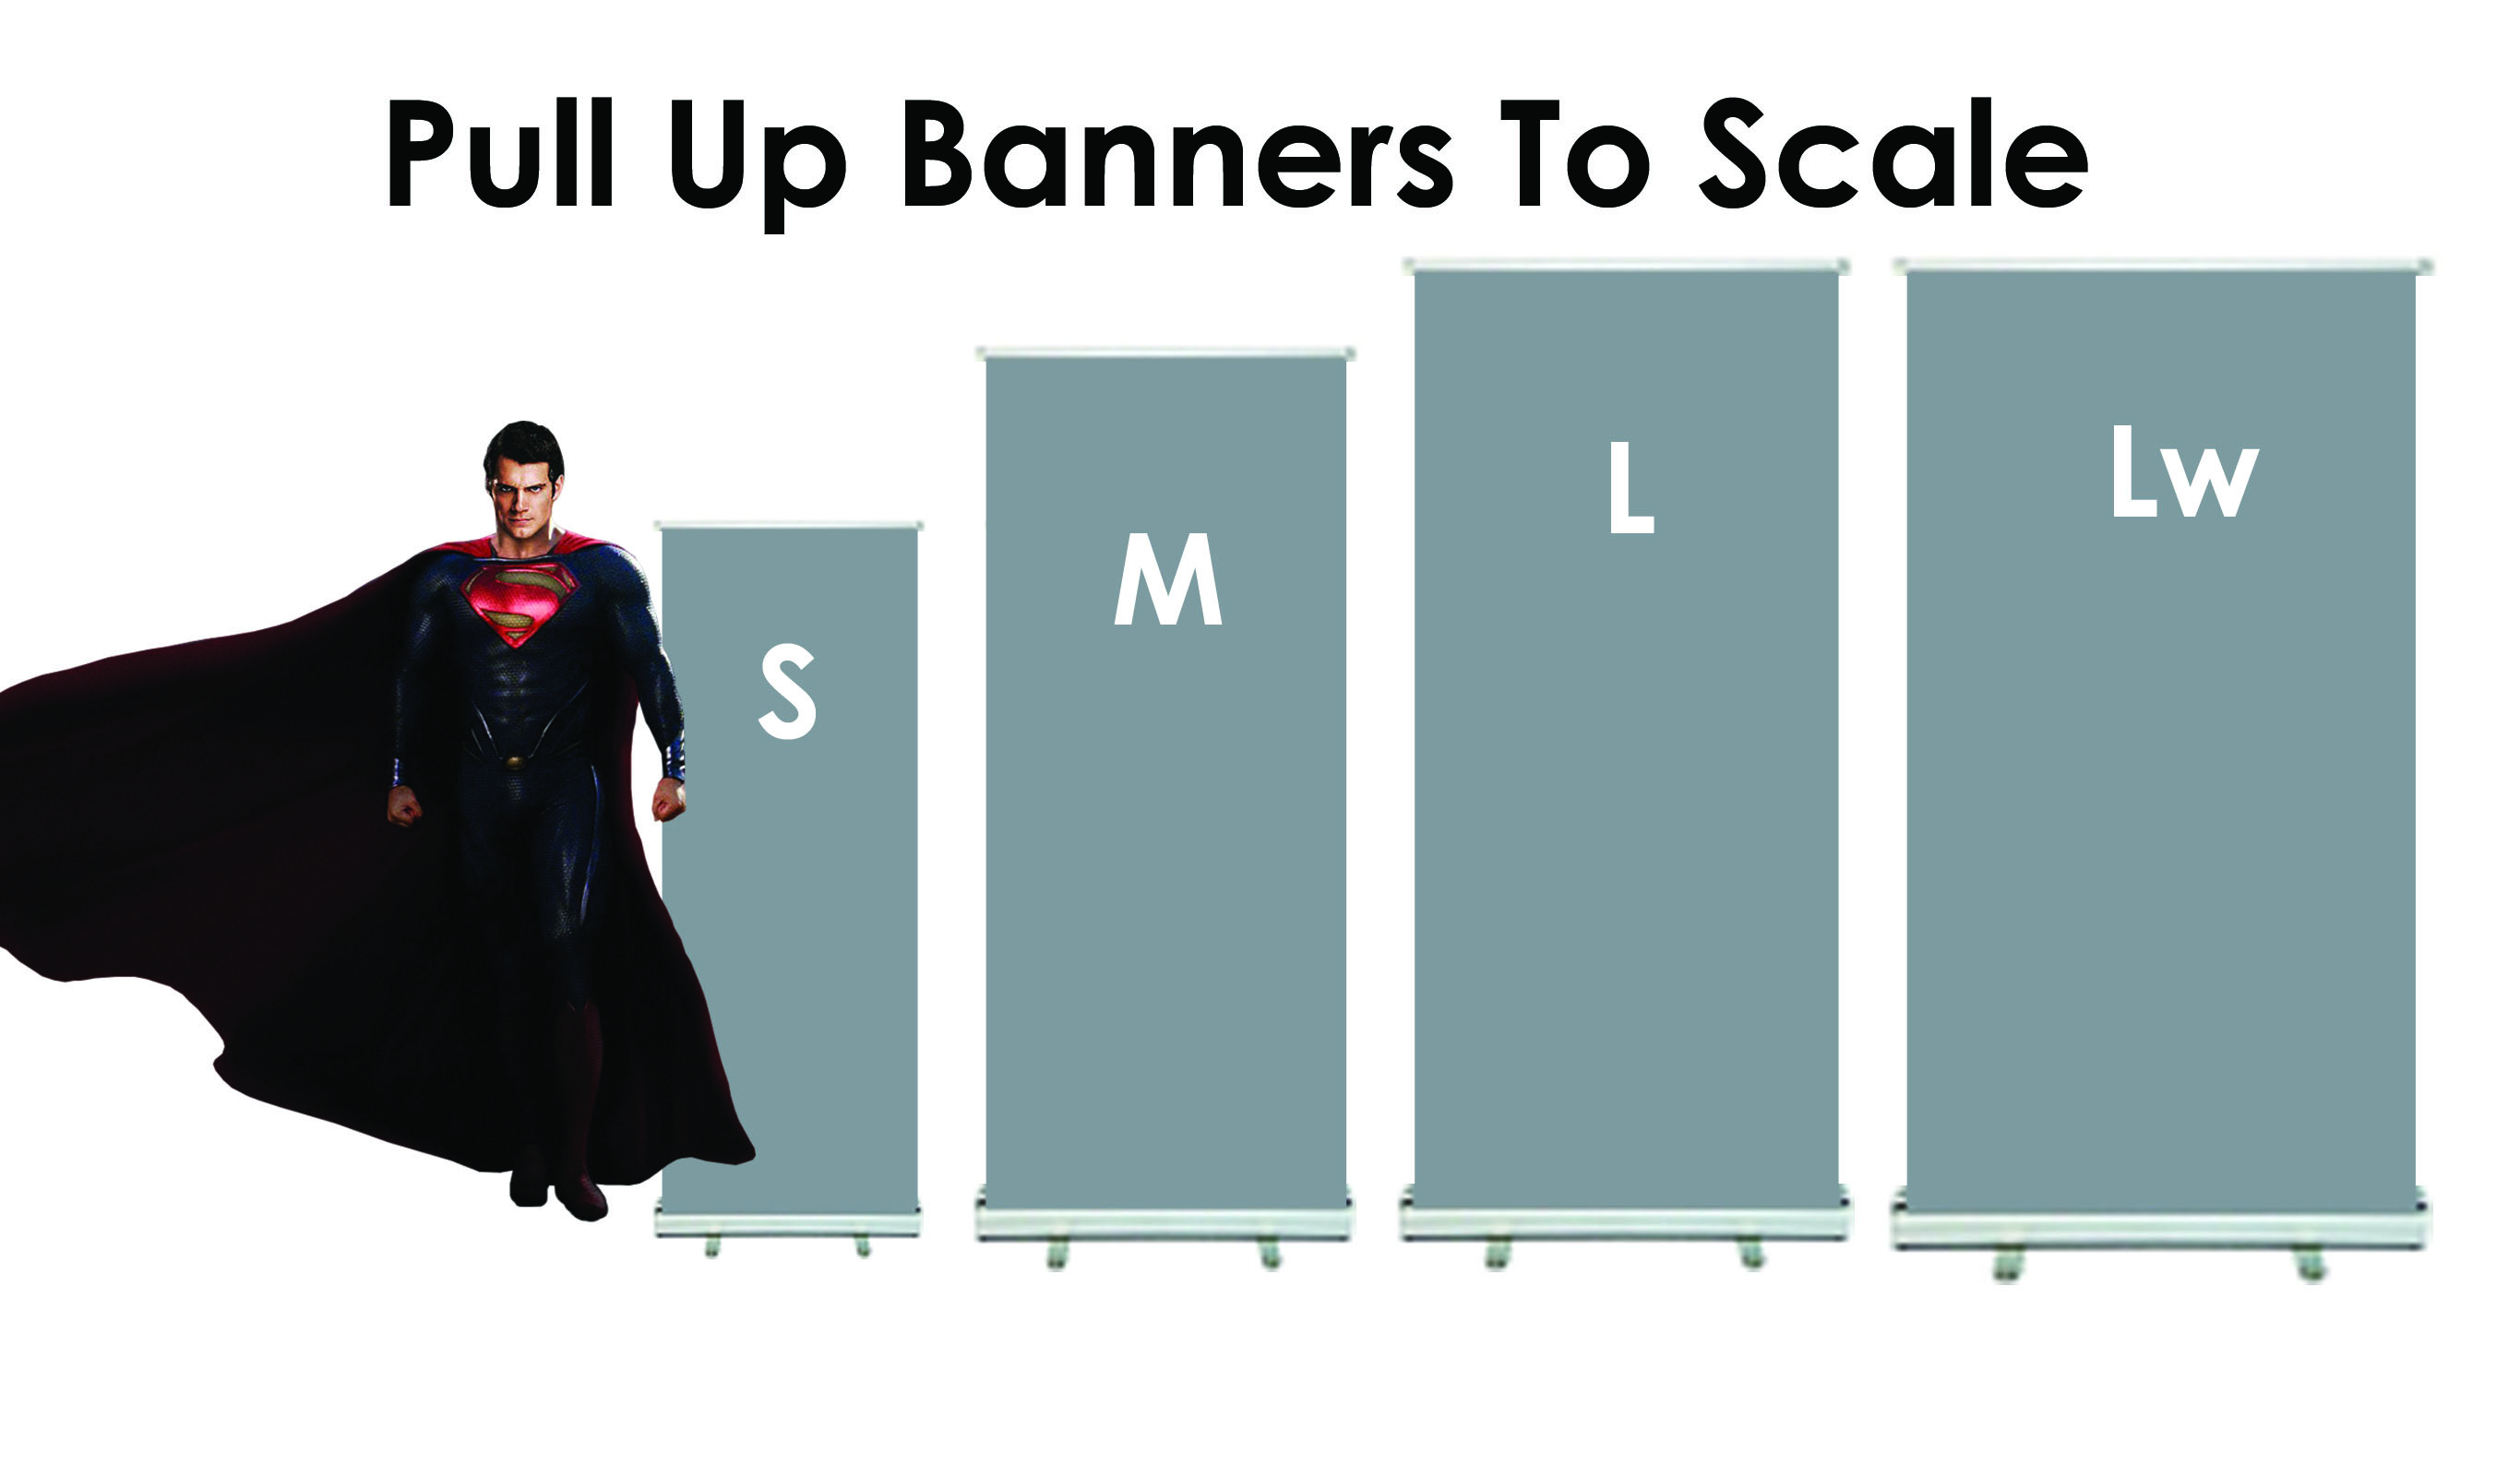 Pull Up Banner Dimensions